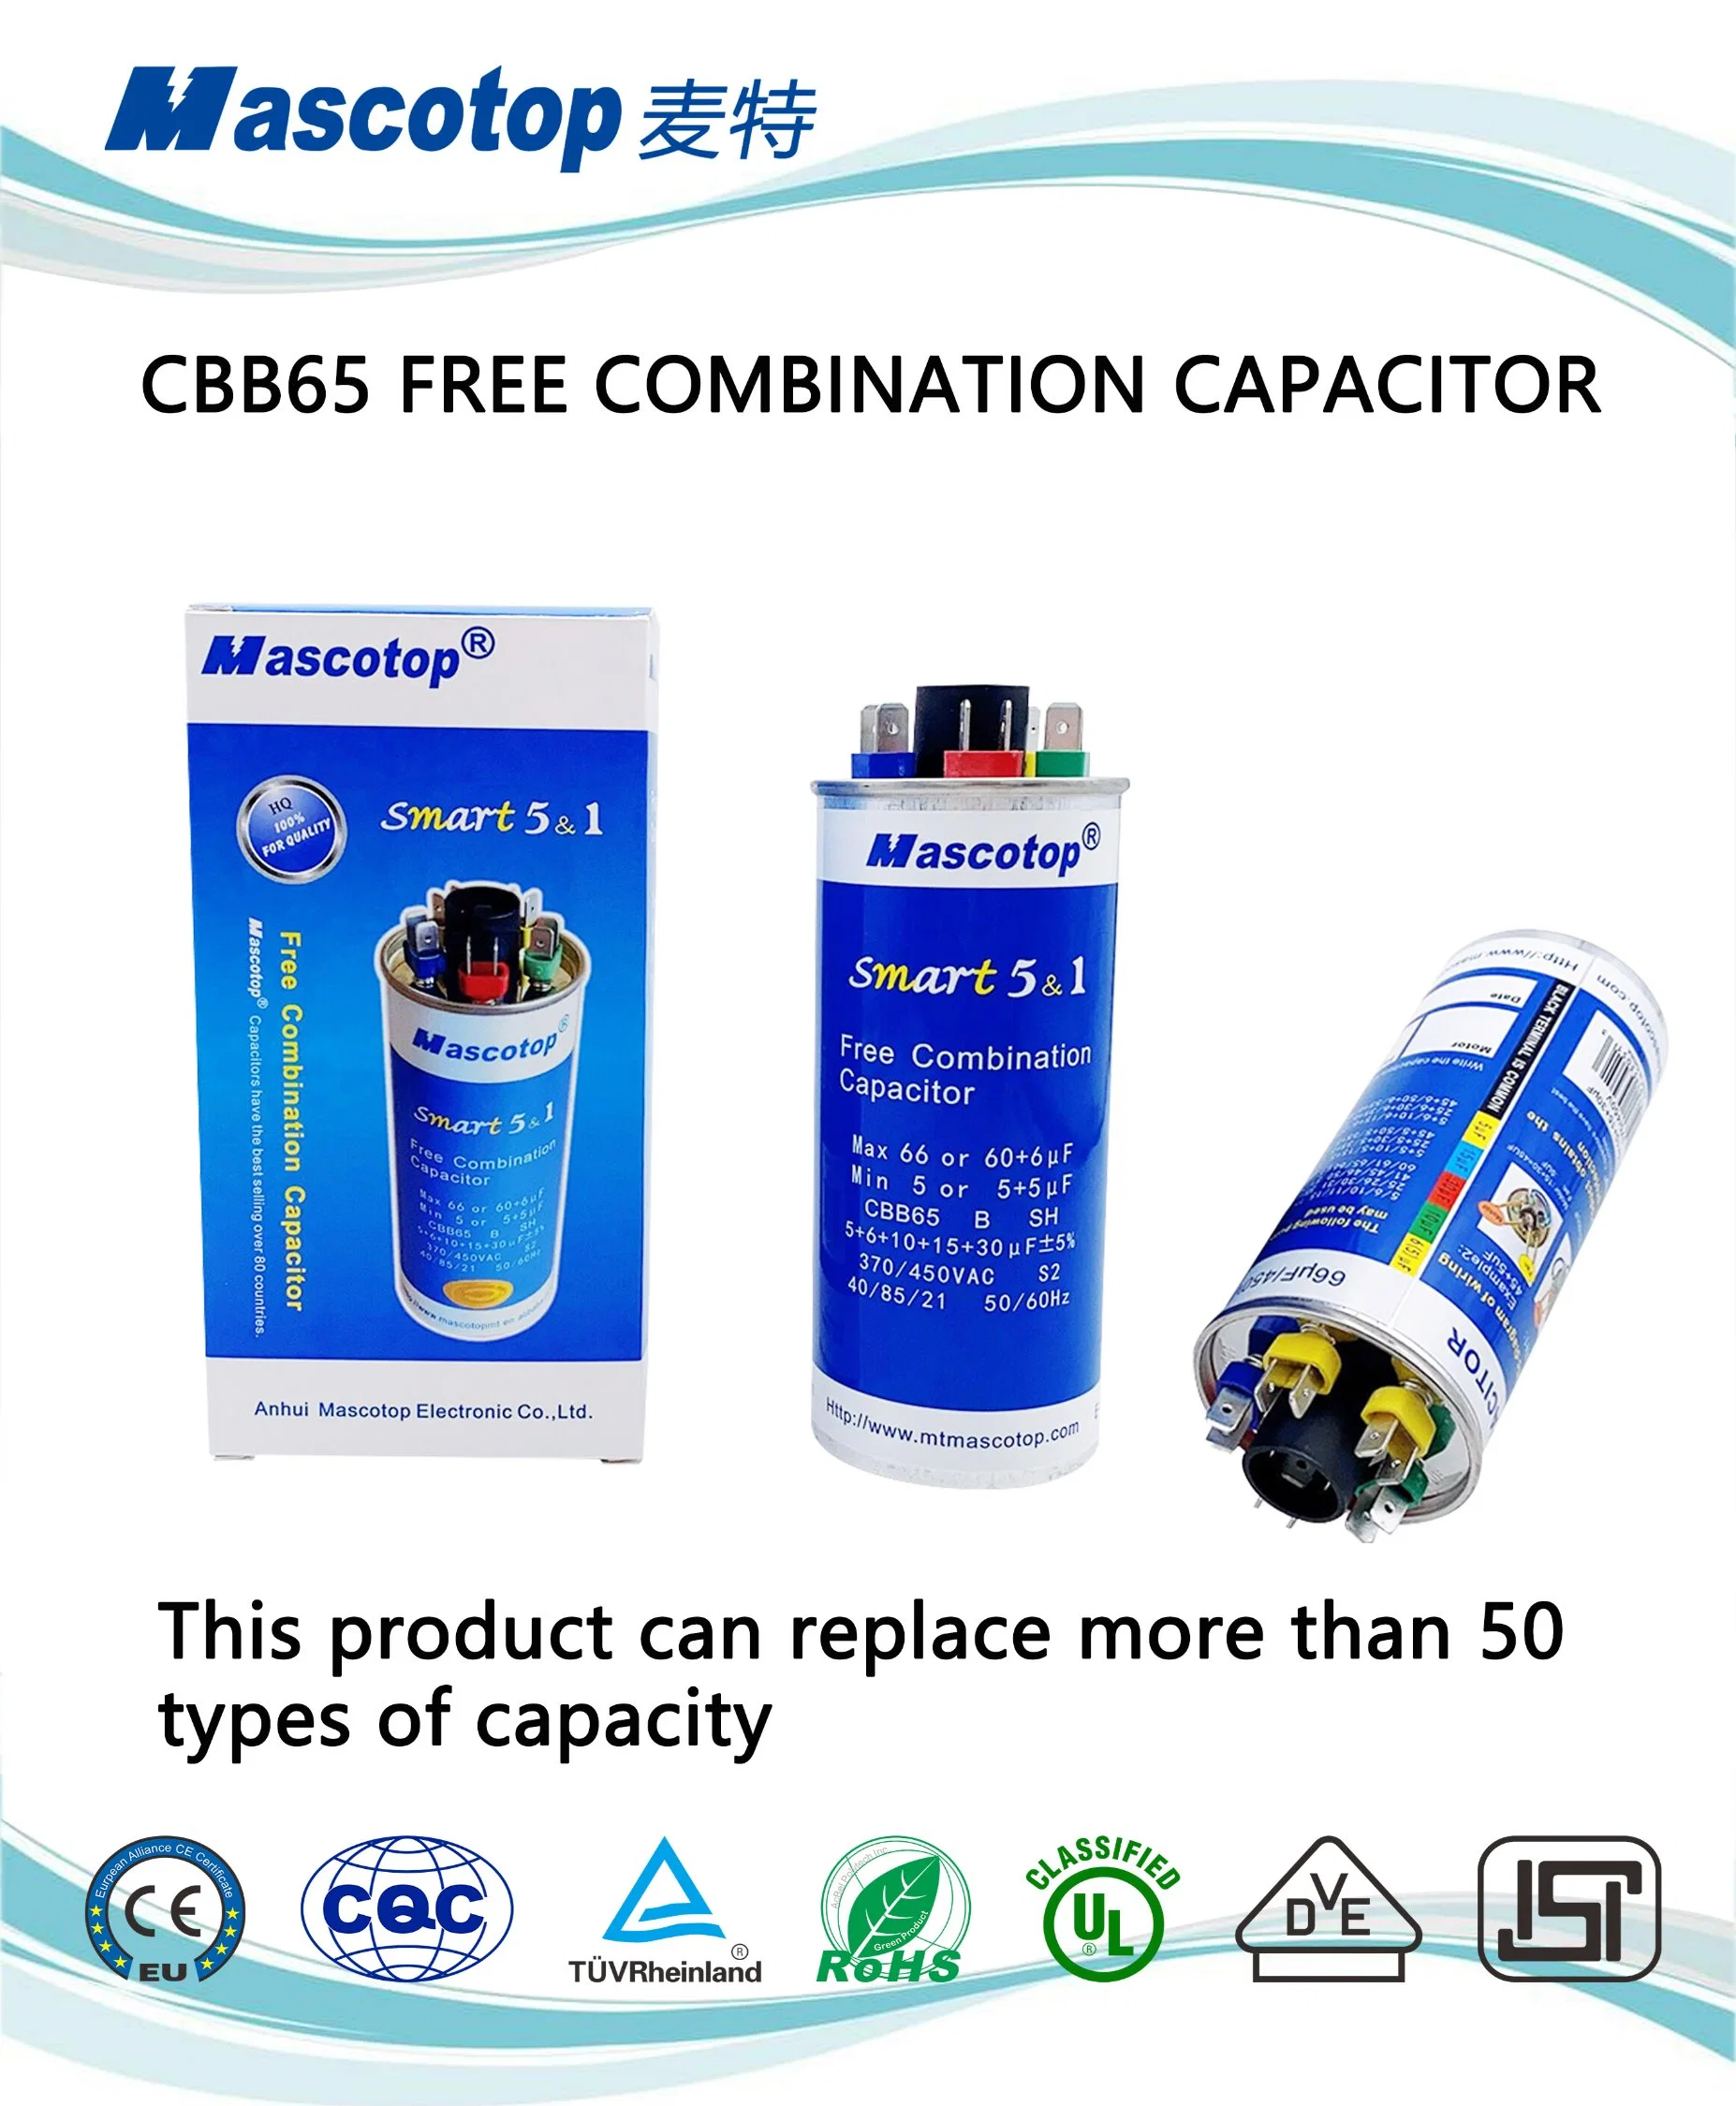 Good Quality Mascotop Cbb65 Free Combination Capacitor for Air Conditioner Use